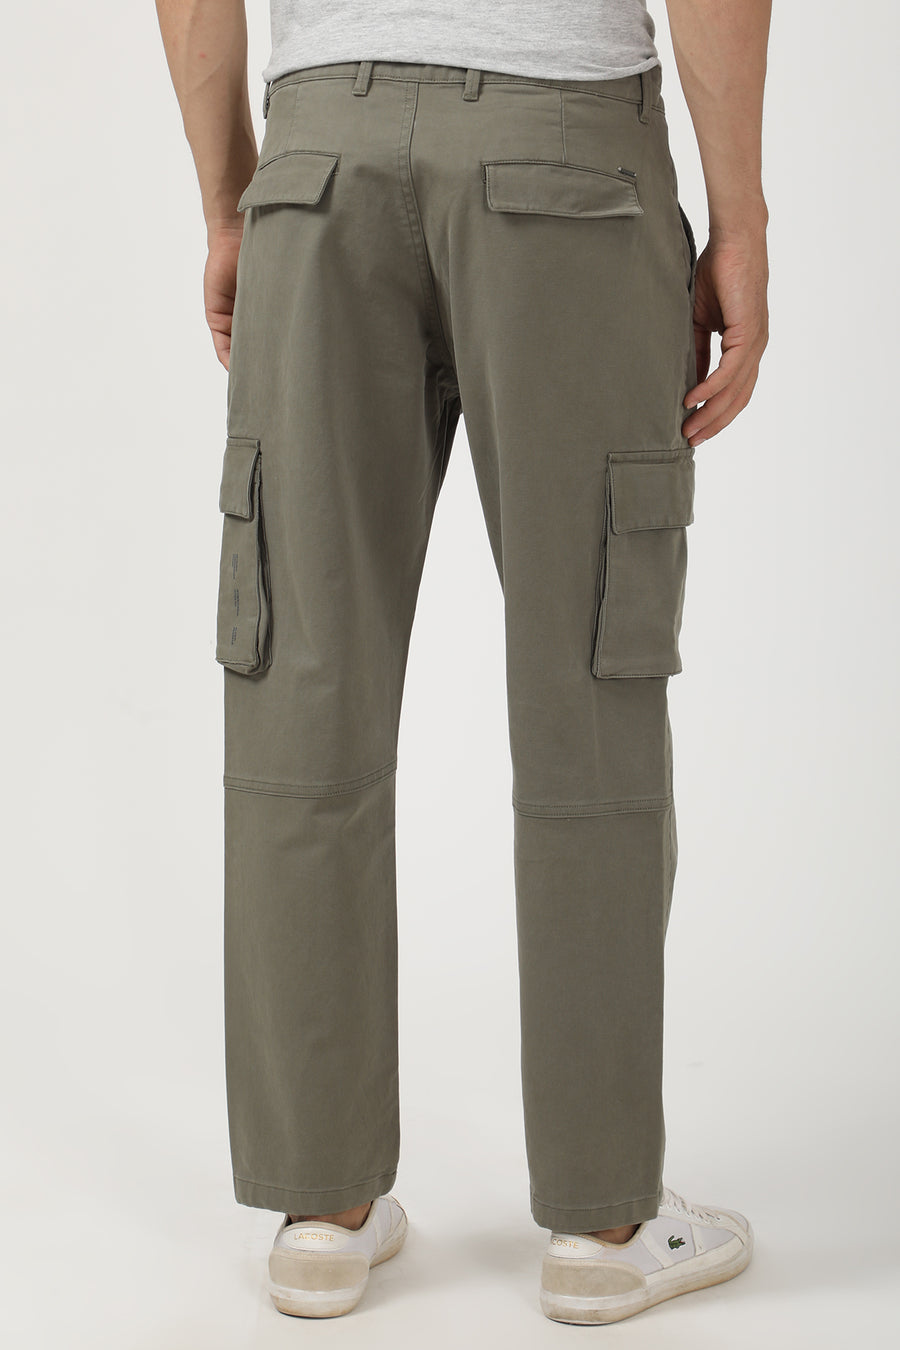 Creed - Comfort Cargo Trouser - Green